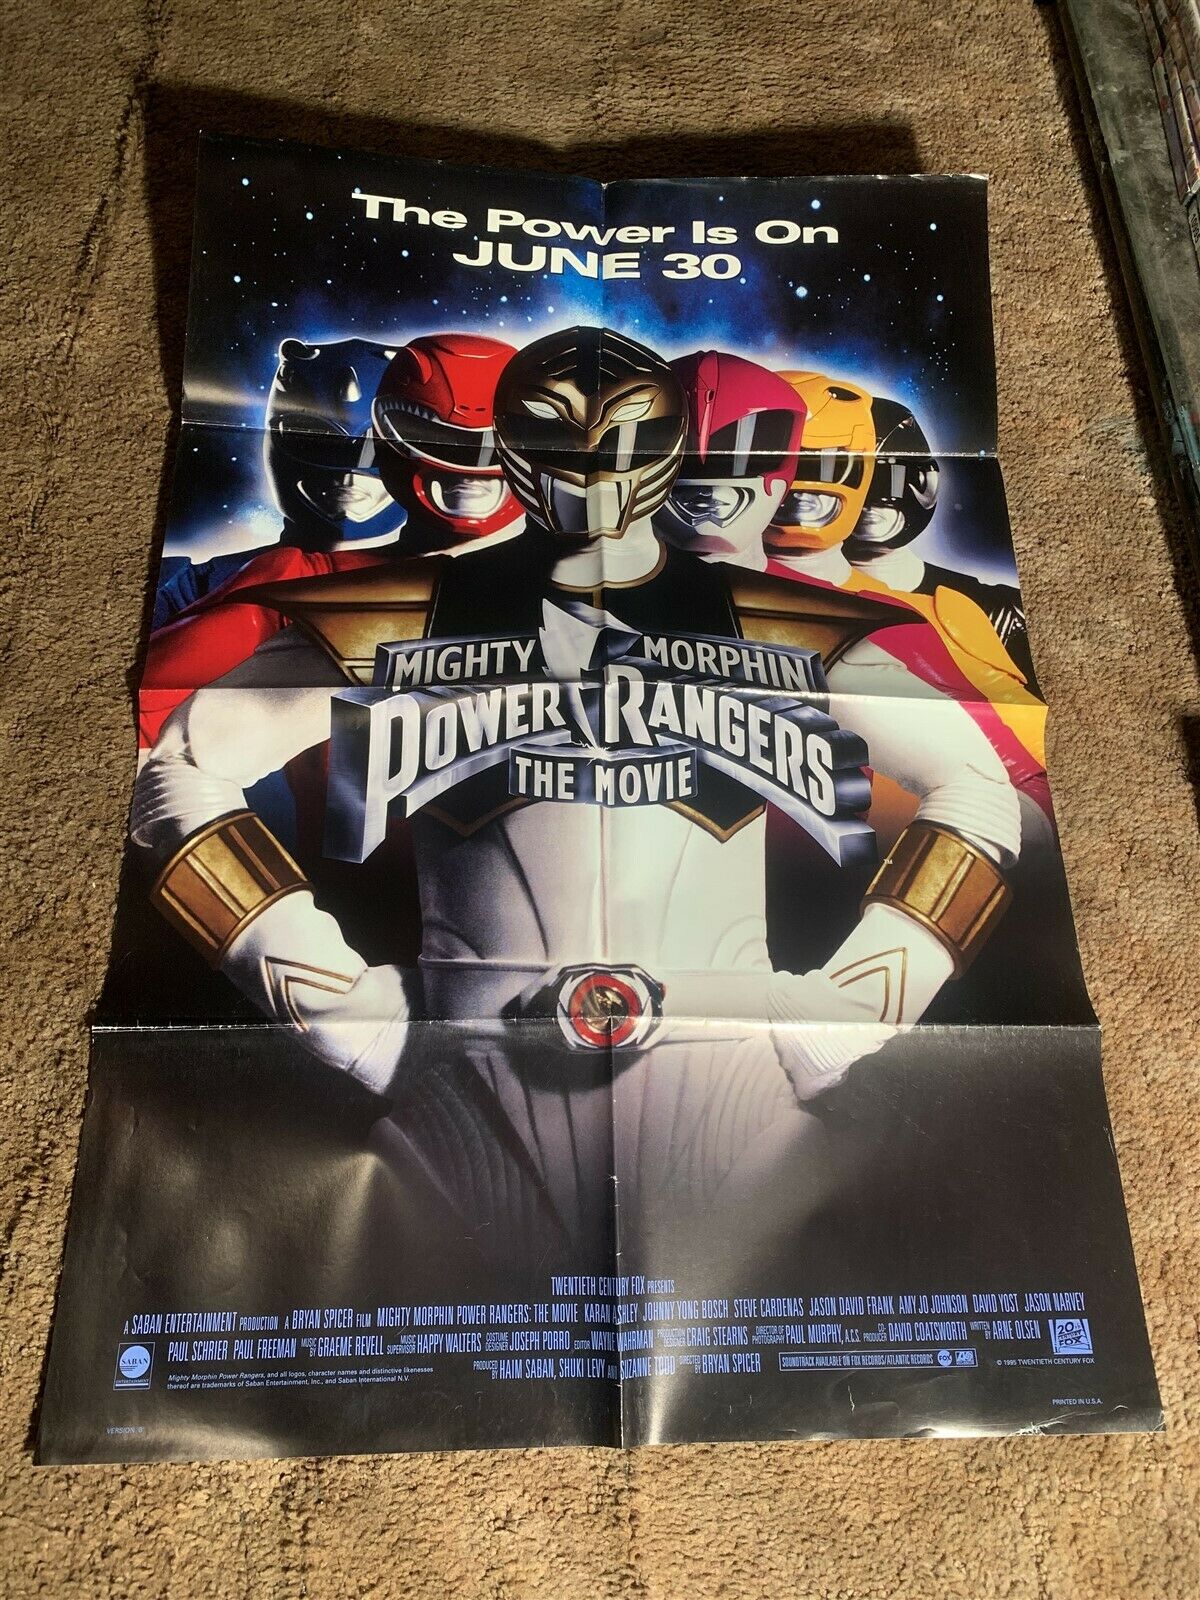 Mighty Morphin Power Rangers Orig Movie Poster 1995 Cult Classic